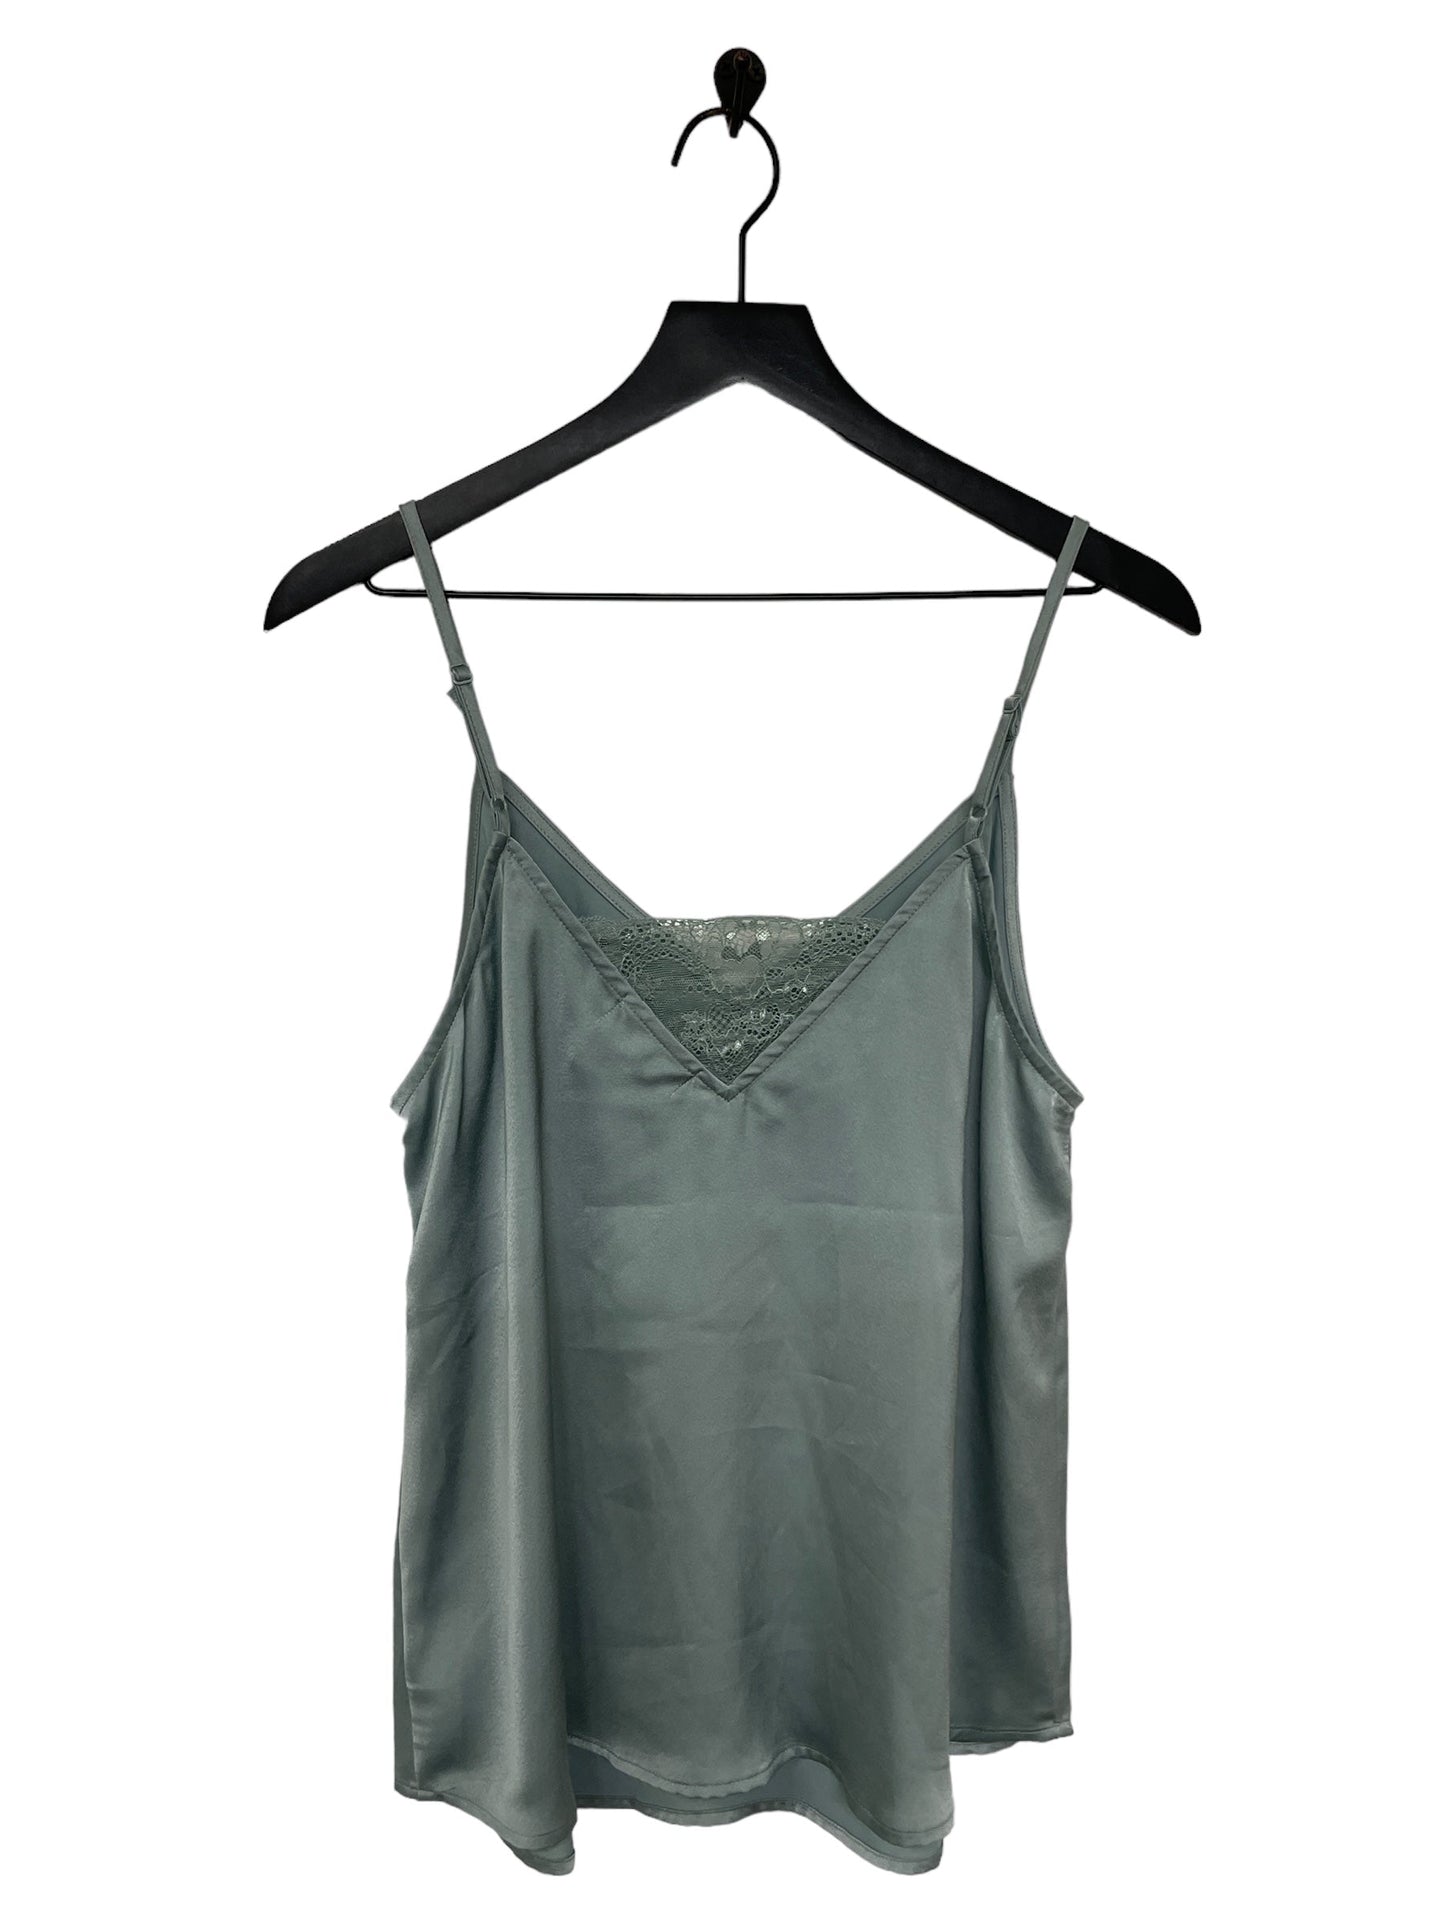 Blue Top Sleeveless The Nines, Size L